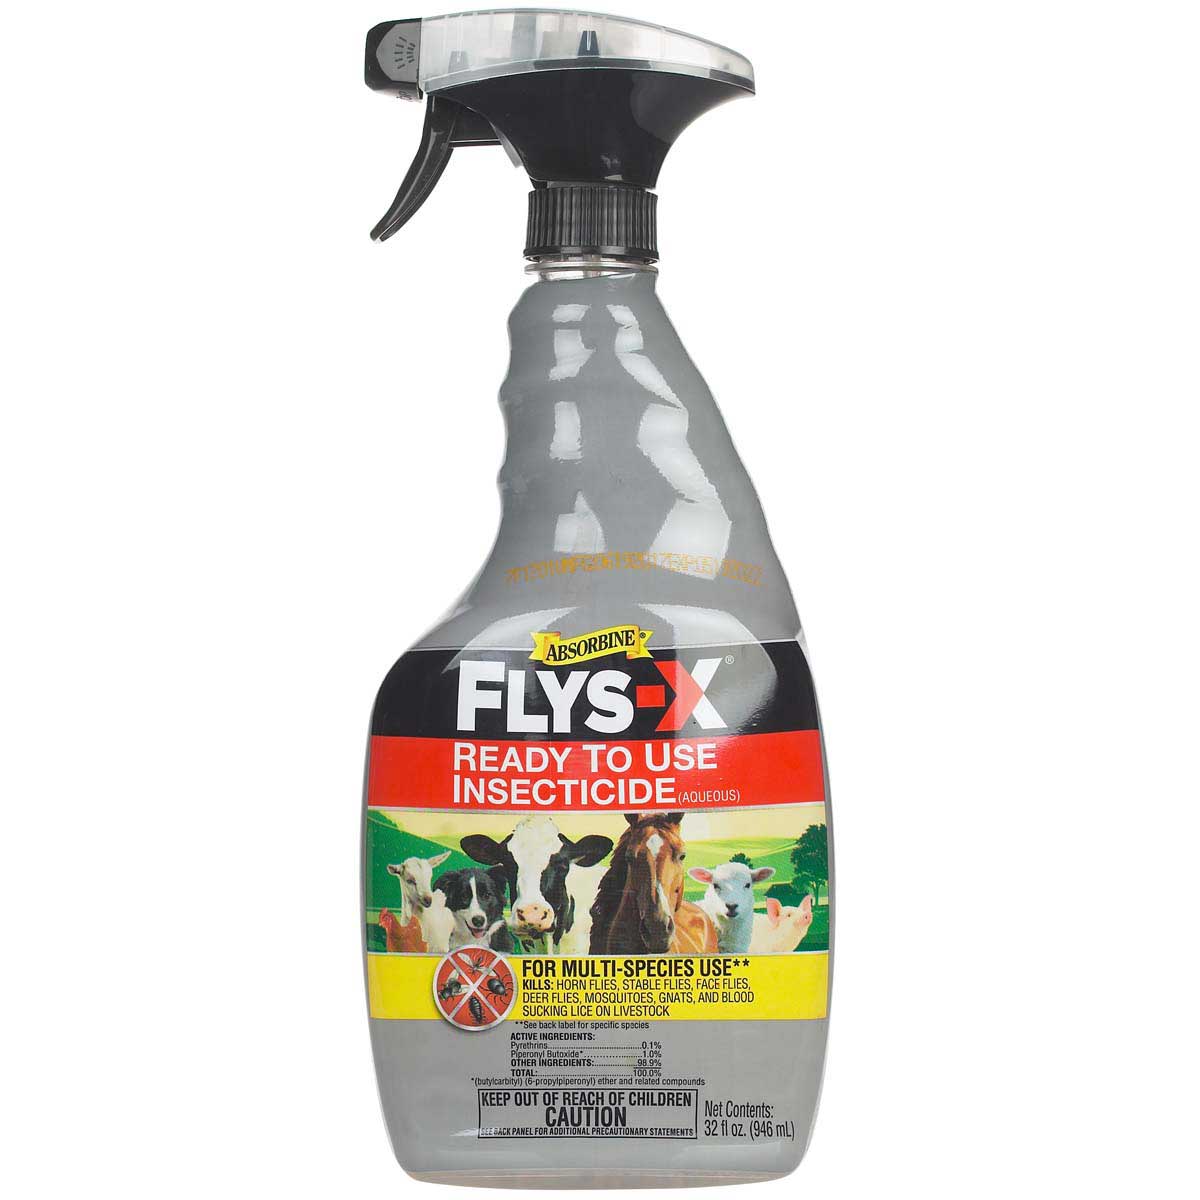 Flys-X Ready to Use Insecticide Fly Spray for Livestock W F Young